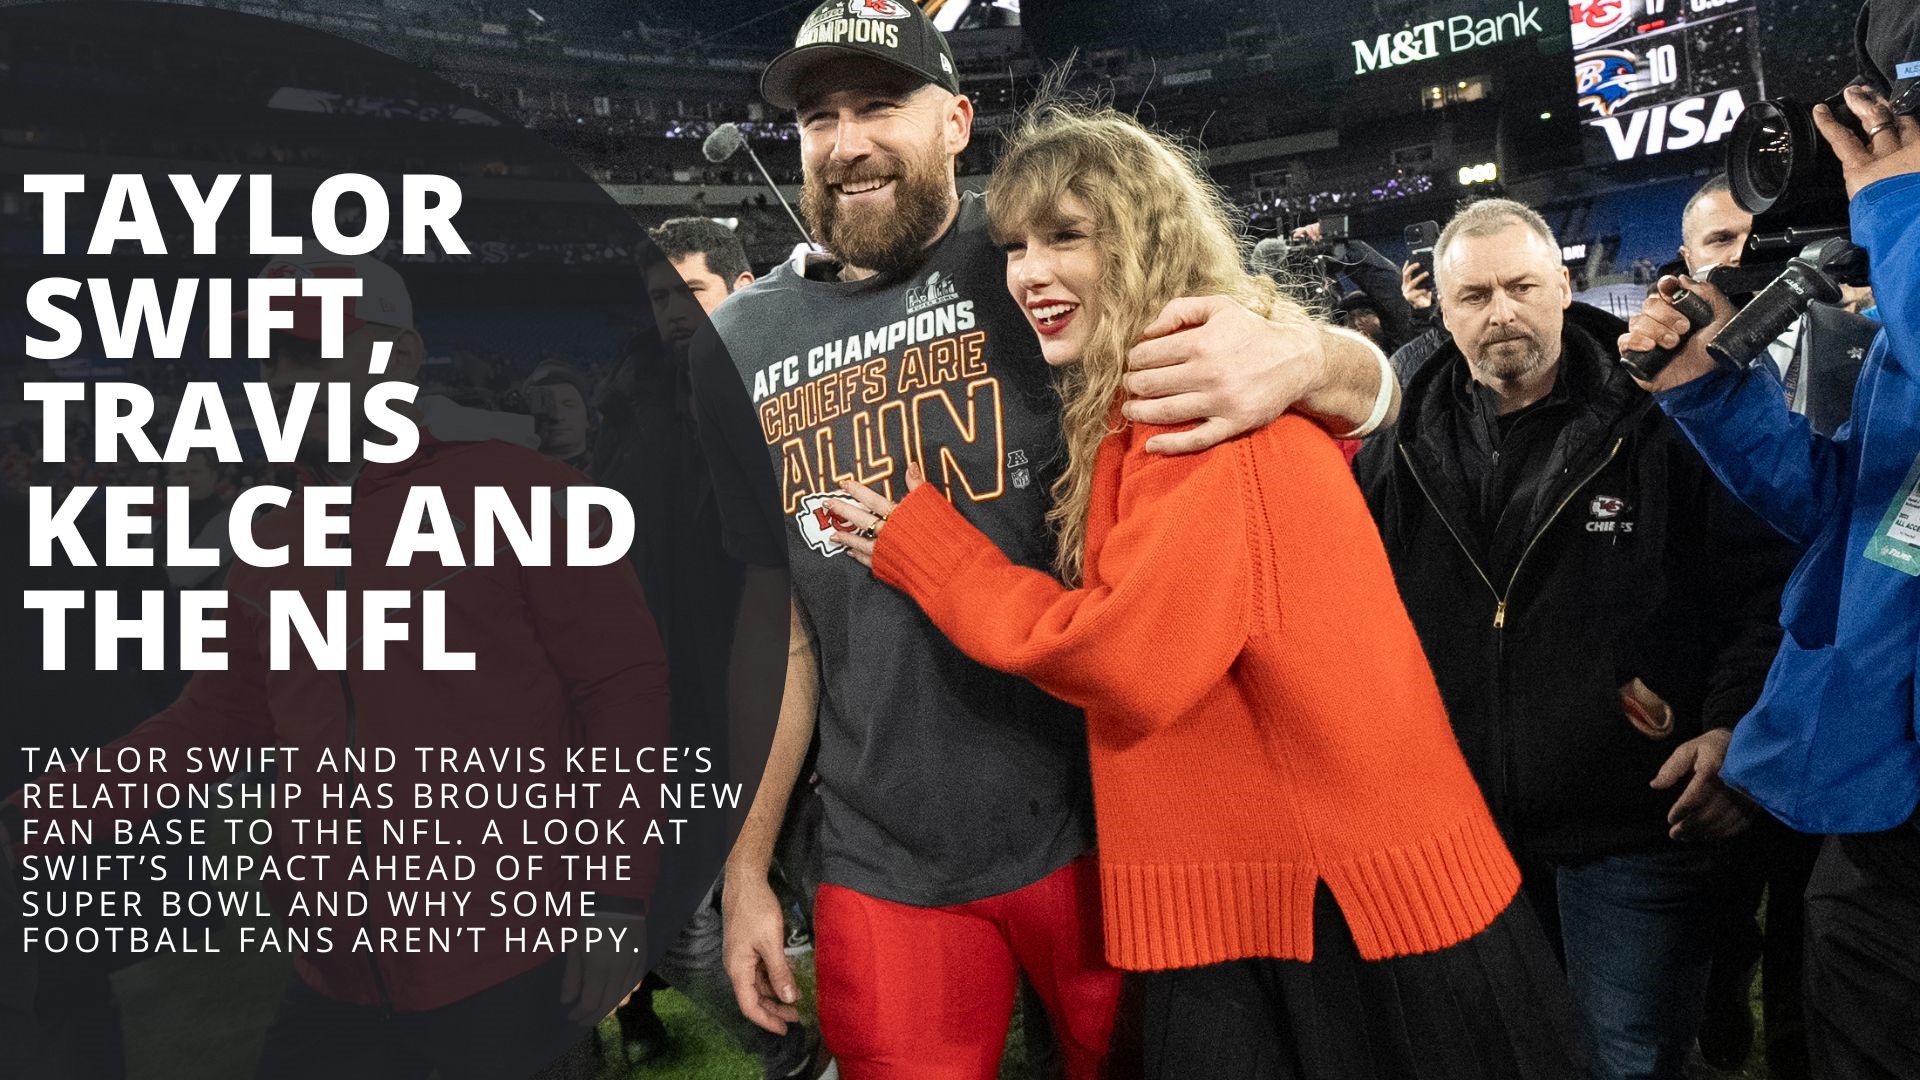 A closer look at the relationship between Taylor Swift and Travis Kelce. As we head into the Super Bowl, we look at how Swift's appearances has impacted the NFL.